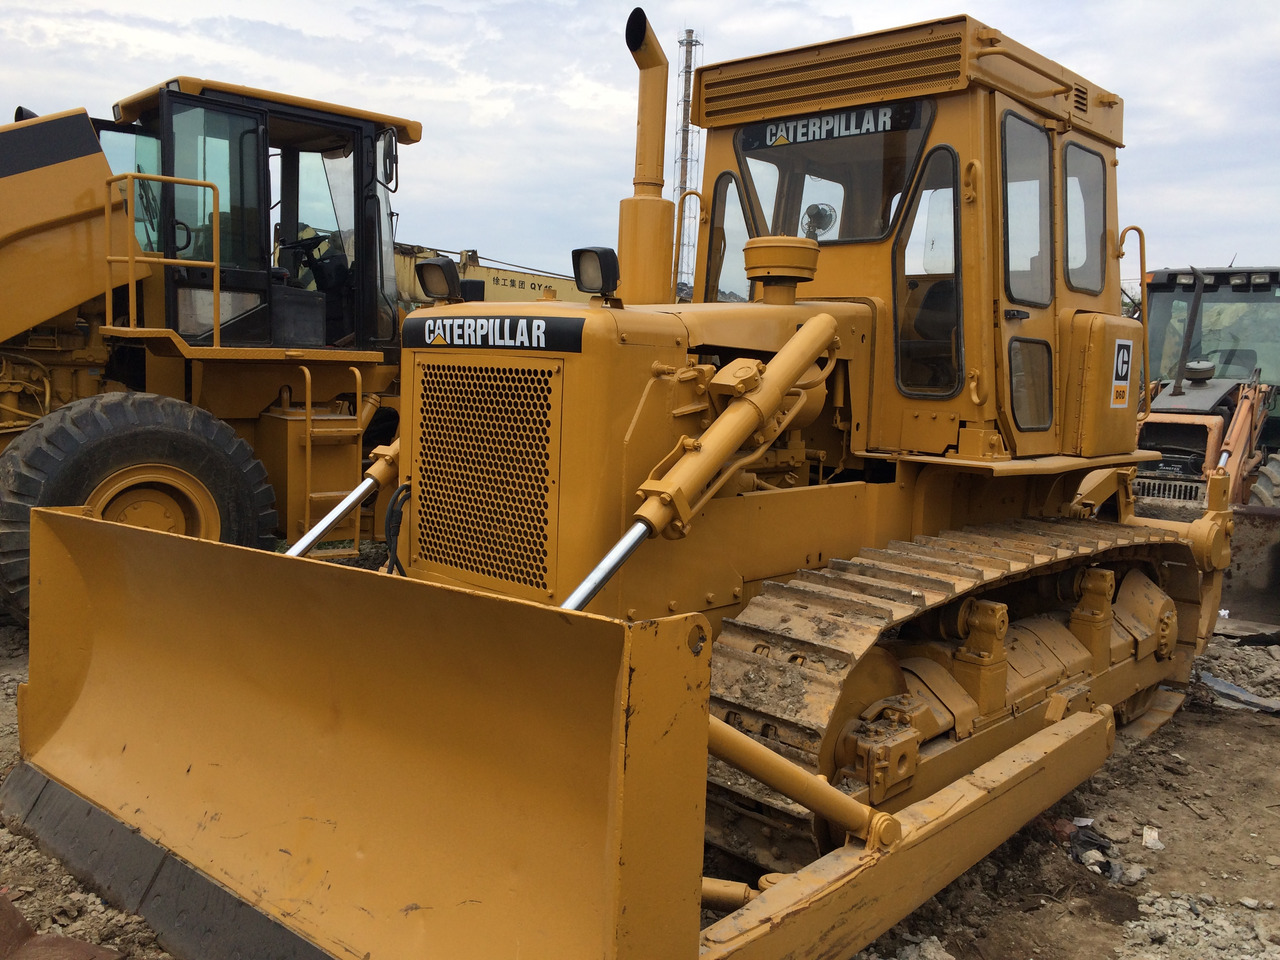 Yeni Buldozer Famous brand CATERPILLAR used D6D in  good condition for sale: fotoğraf 2